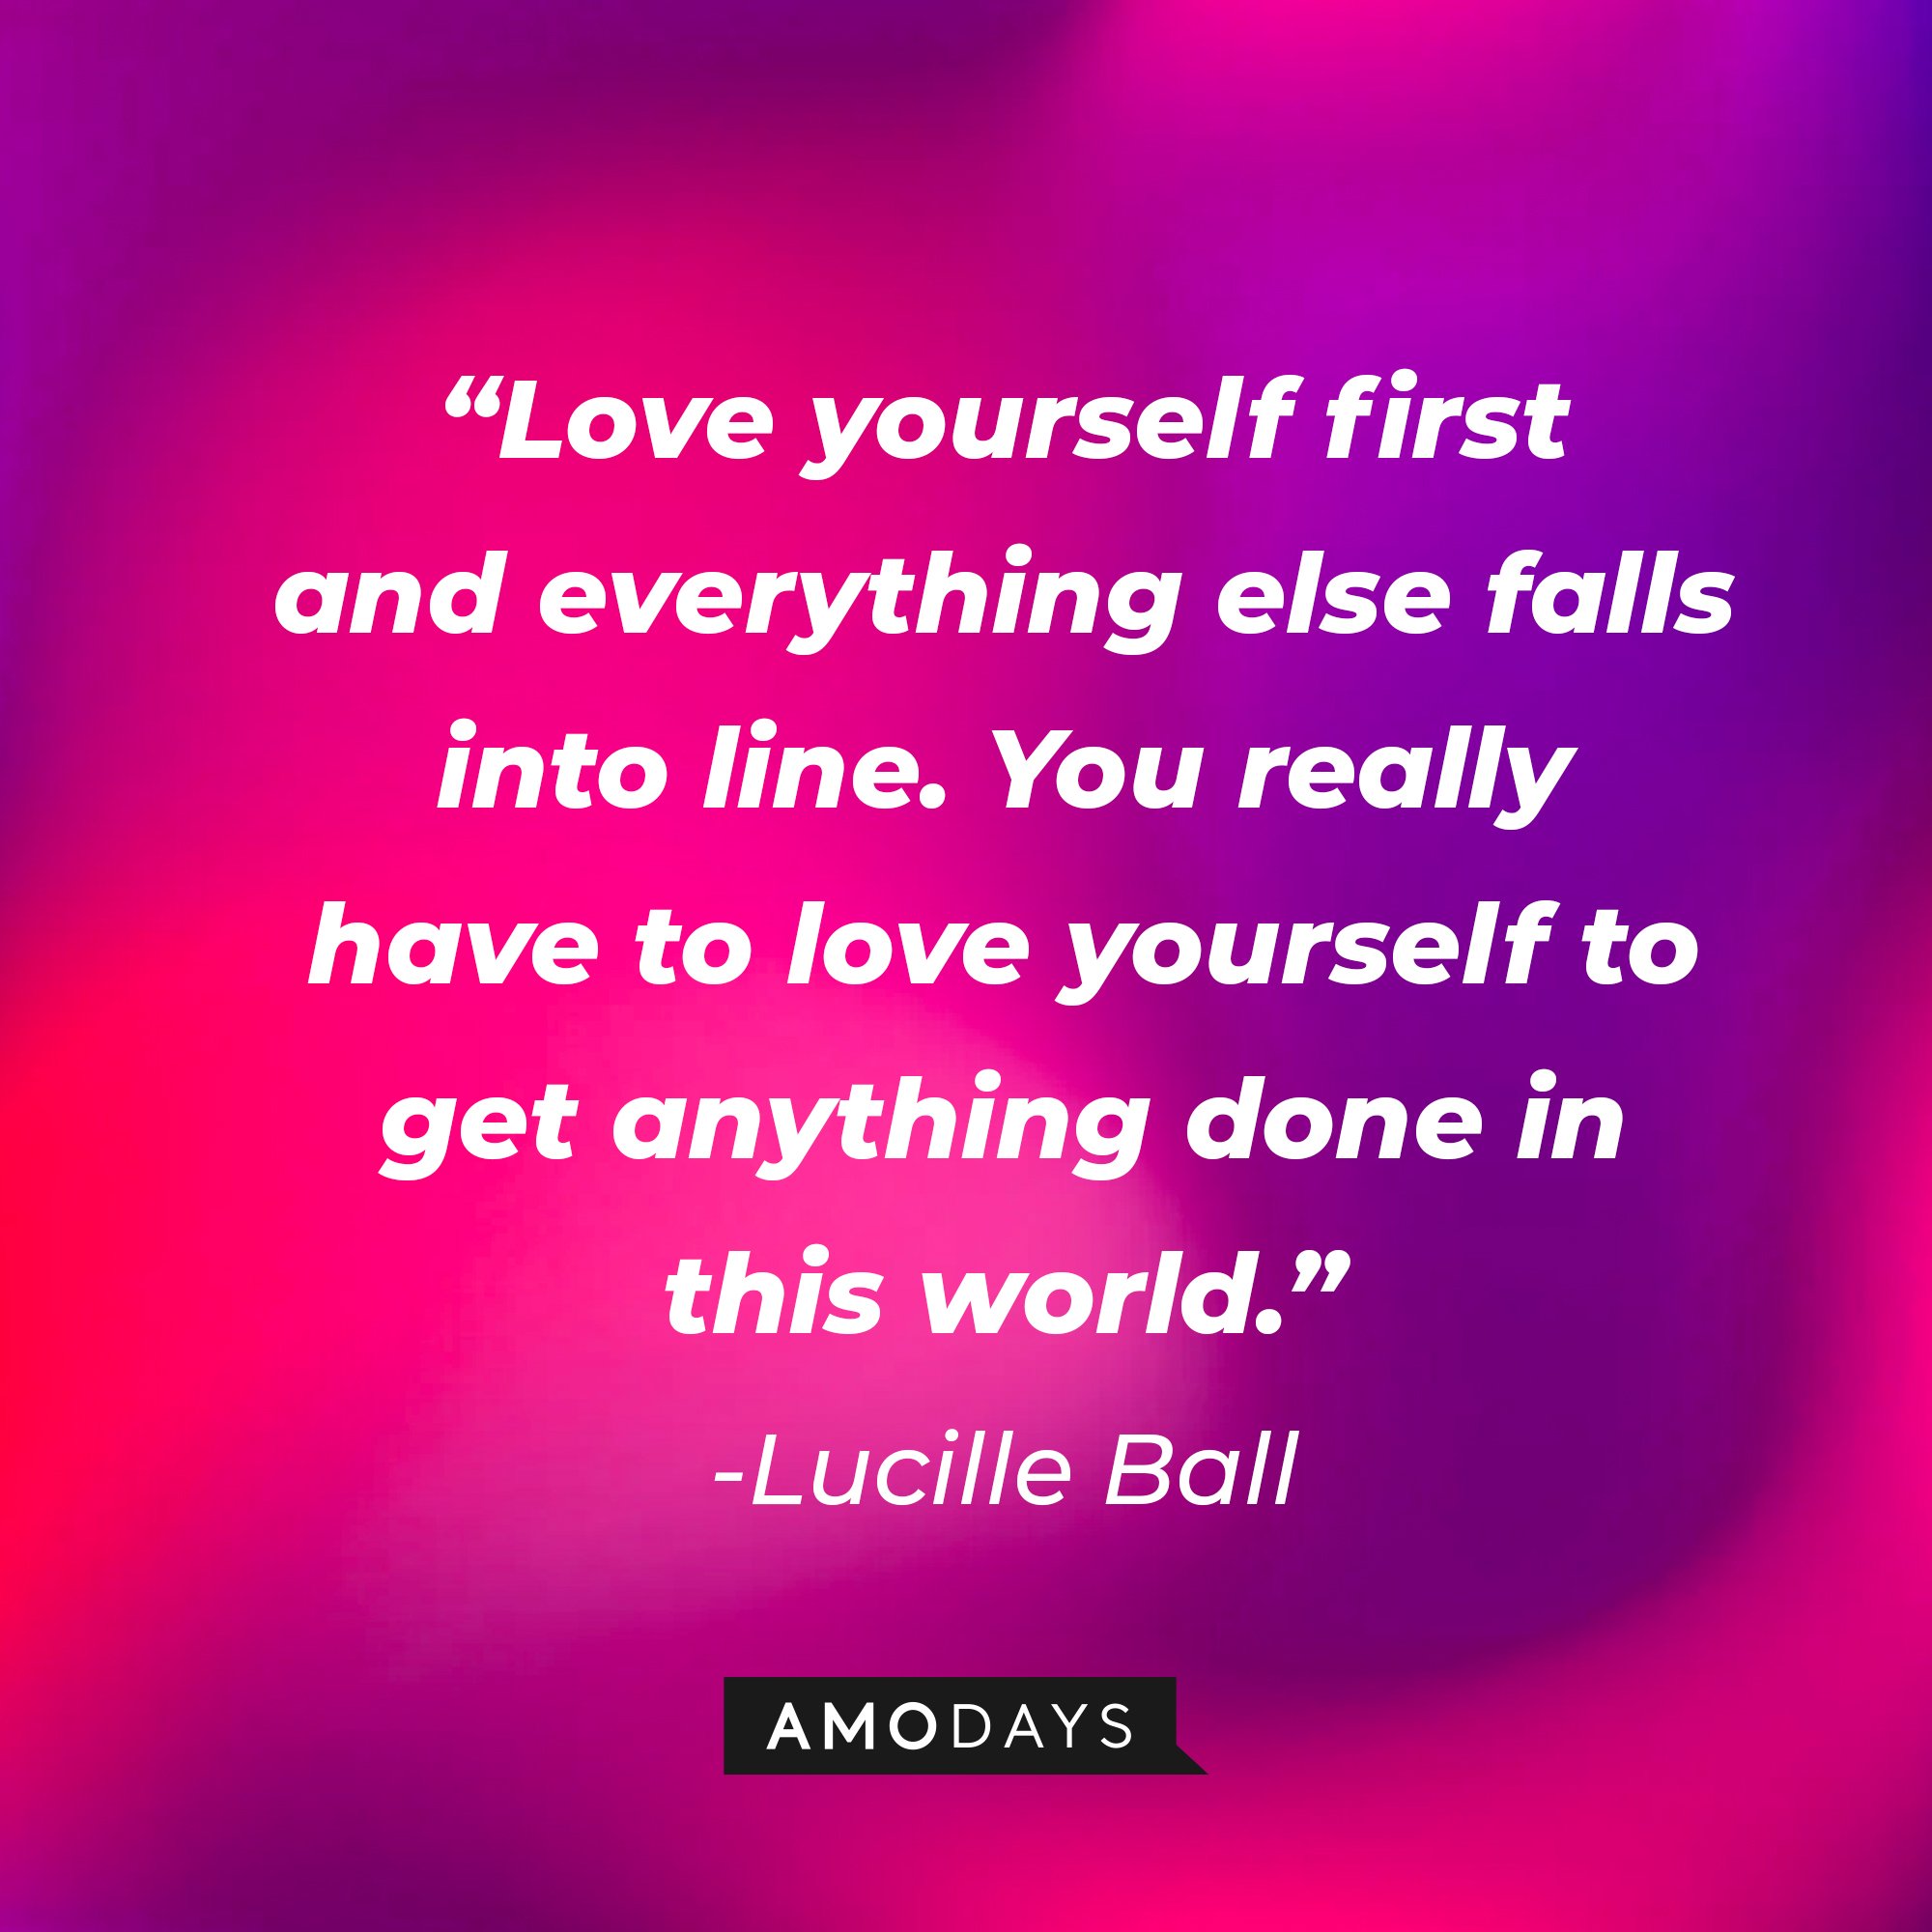 Lucille Ball’s quote: “Love yourself first, and everything else falls into line.” | Image: AmoDays